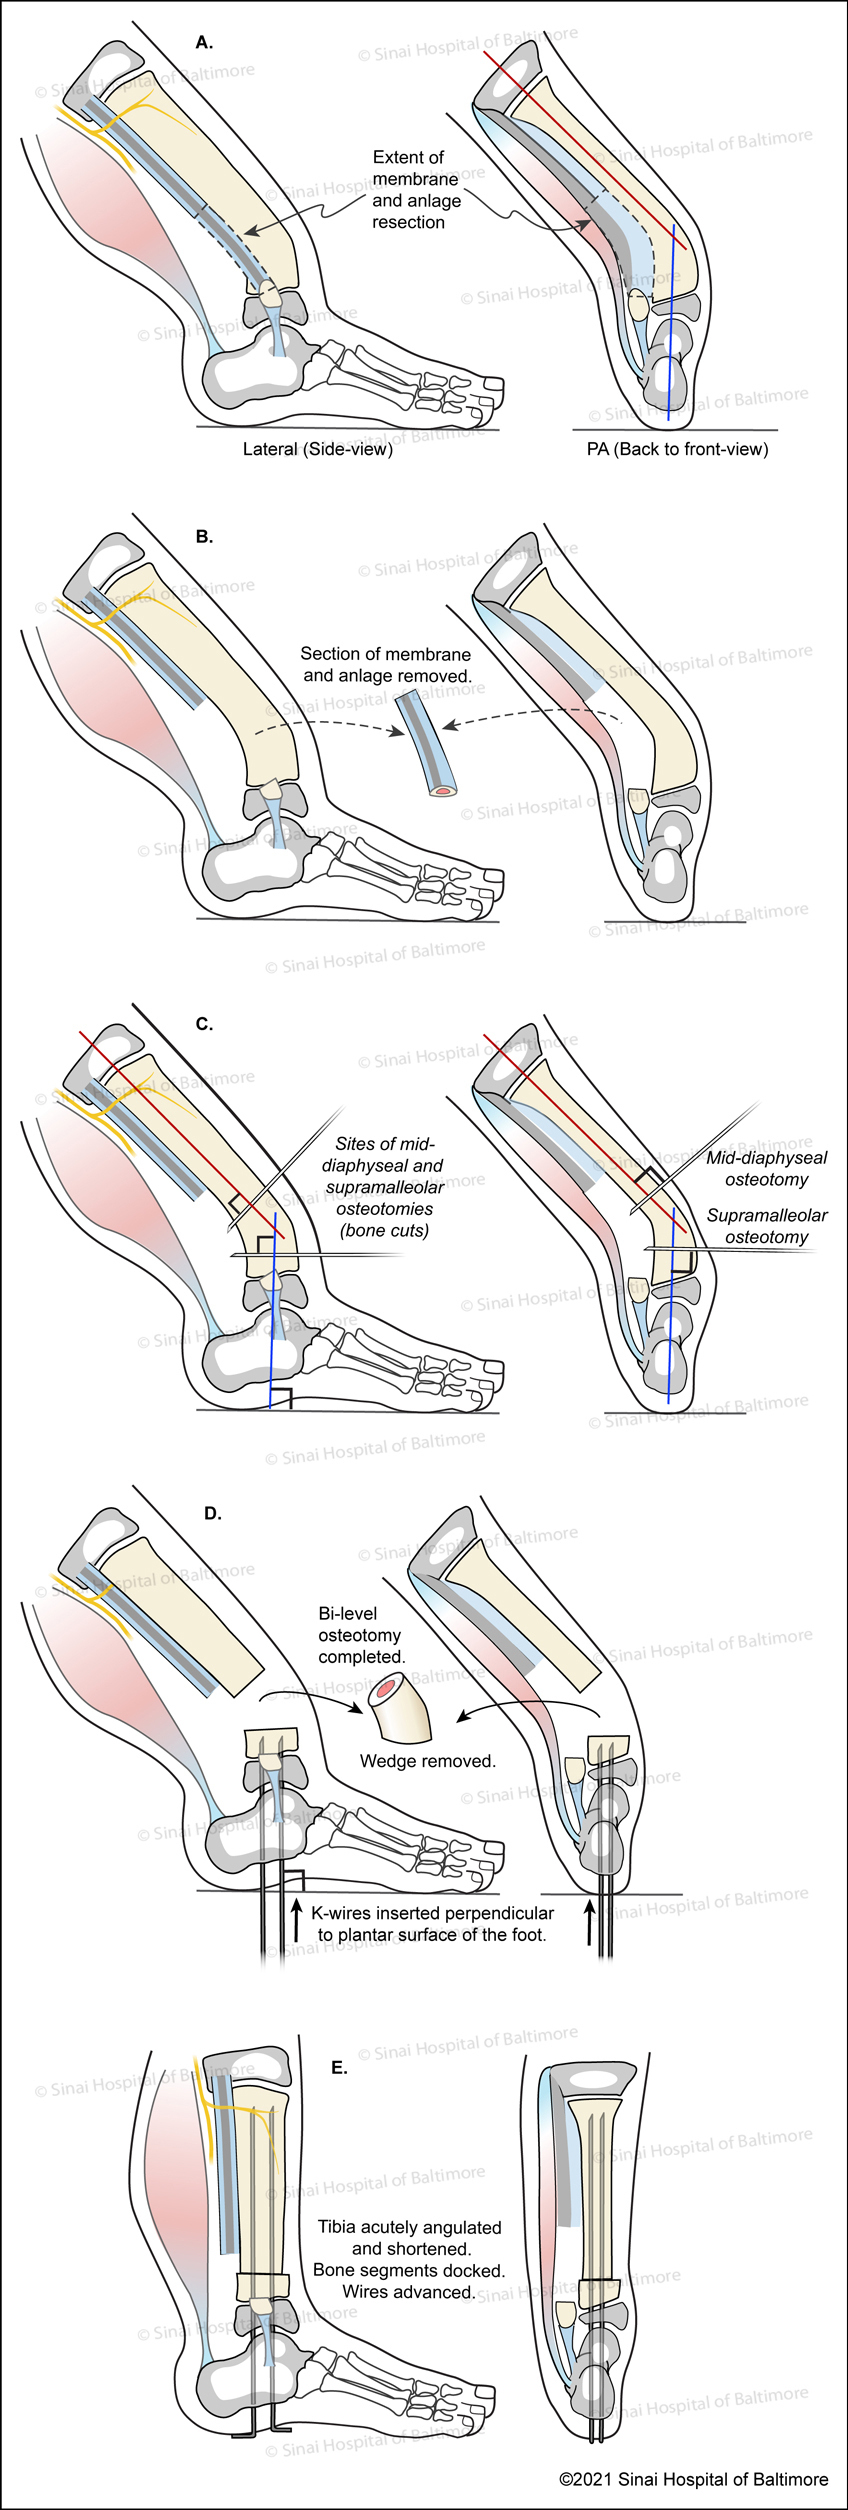 SUPERankle Surgical Technique for Supramalleolar Type Fibular Hemimelia (Paley Type 3A - ankle type) Fig. A, AP View, Peroneal longus tendon is divided proximally. B, AP View, Peroneal brevis tendon is divided distally. C, Lateral and AP views, The extent of the membrane and anlage resection is identified; D, E, AP and Lateral views, Path of Achilles tendon Z-lengthening, sites of mid-diaphyseal and supramalleolar osteotomies are identified, k-wires are inserted.